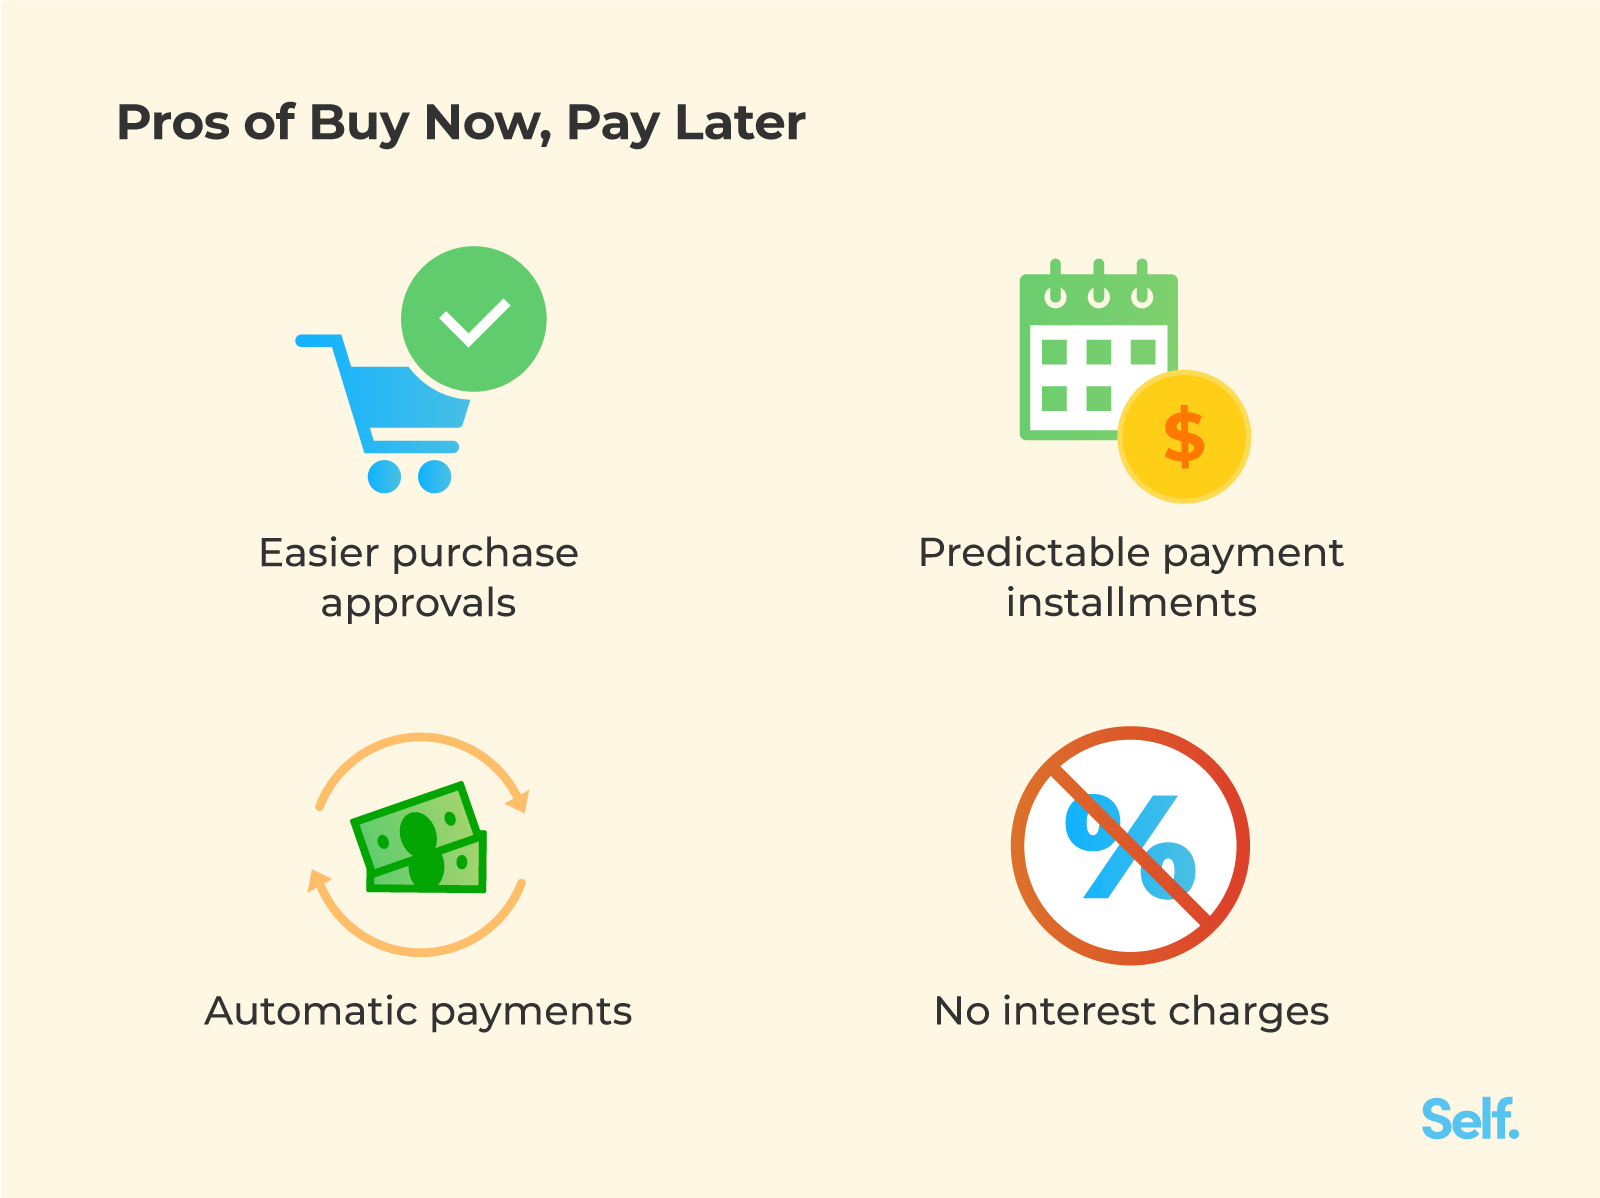 Does Afterpay Build Credit? Understanding Buy Now, Pay Later - Self. Credit  Builder.